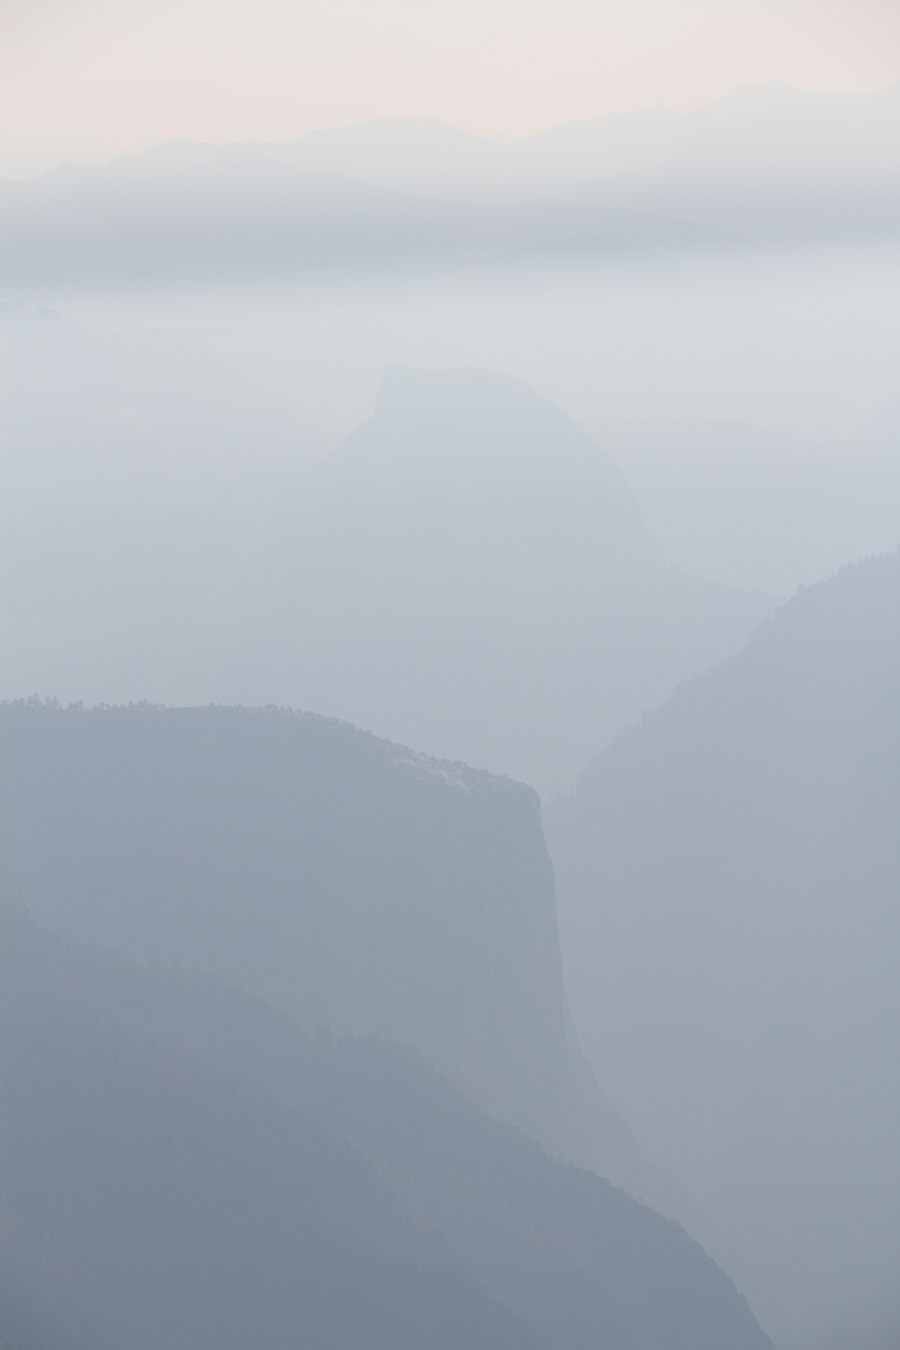 A view of Yosemite Valley during Fire Season - the shadowy shapes of El Capitan and Half Dome barely visible to those who know them.